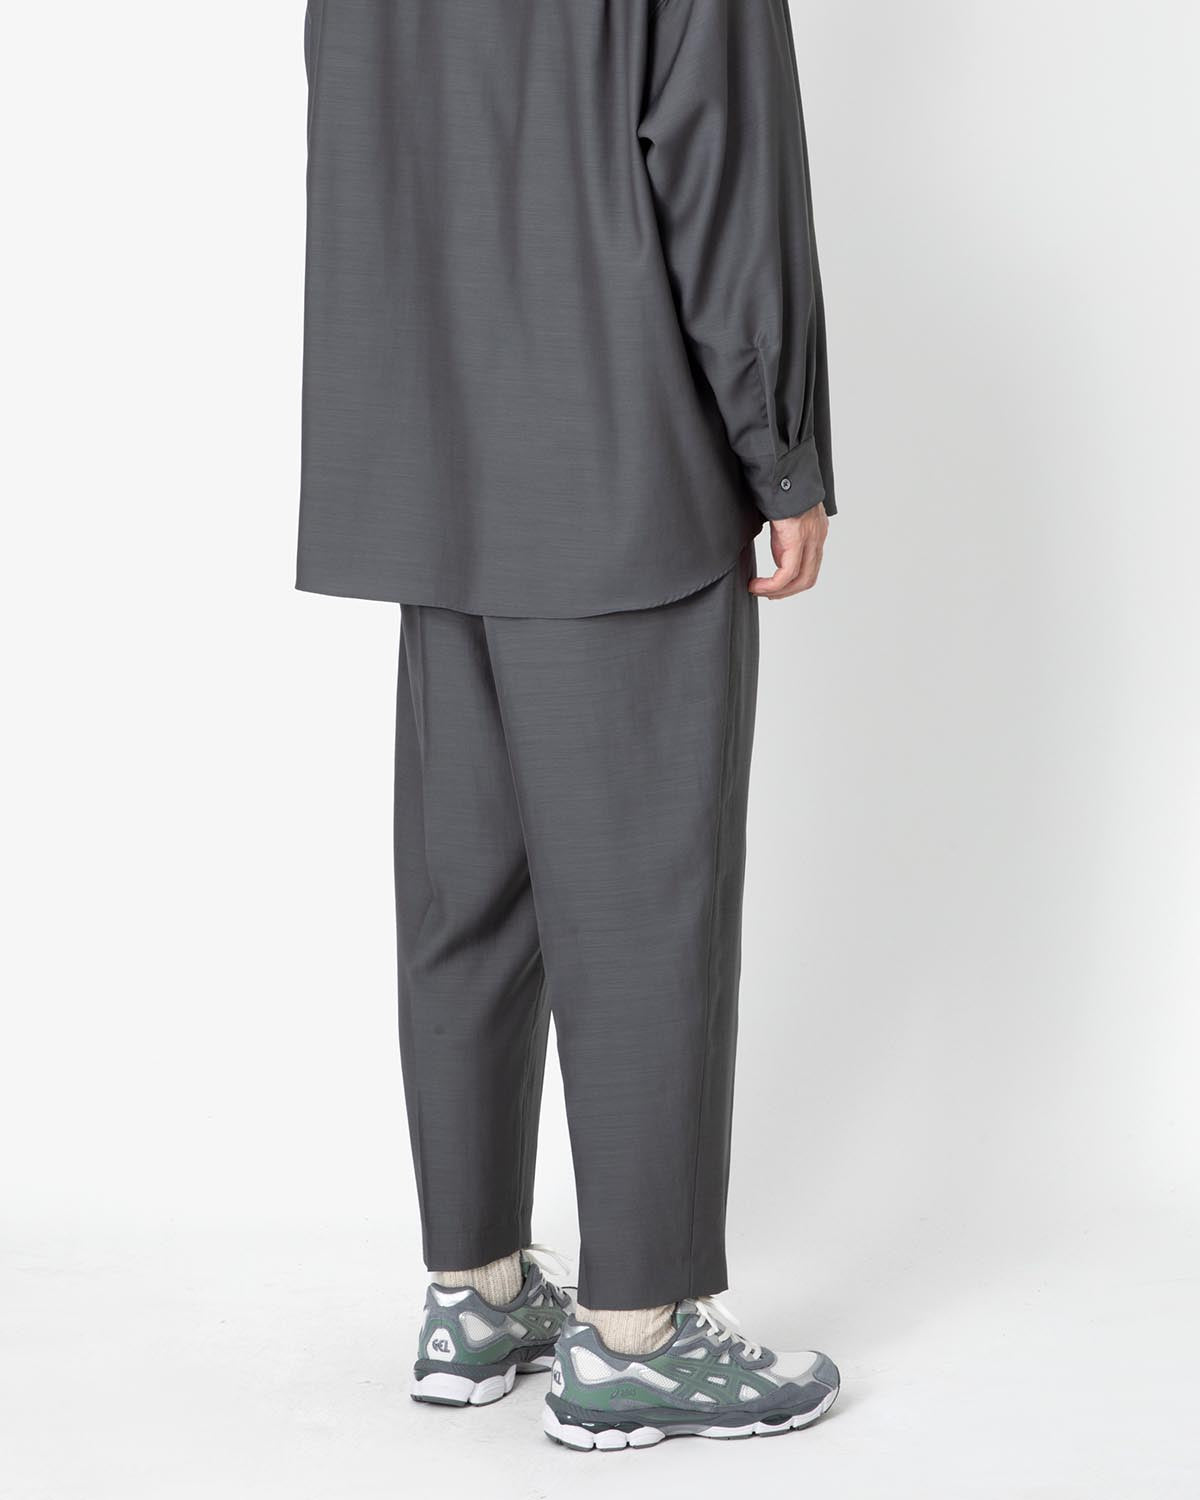 WOOL CUPRO CROPPED TROUSERS